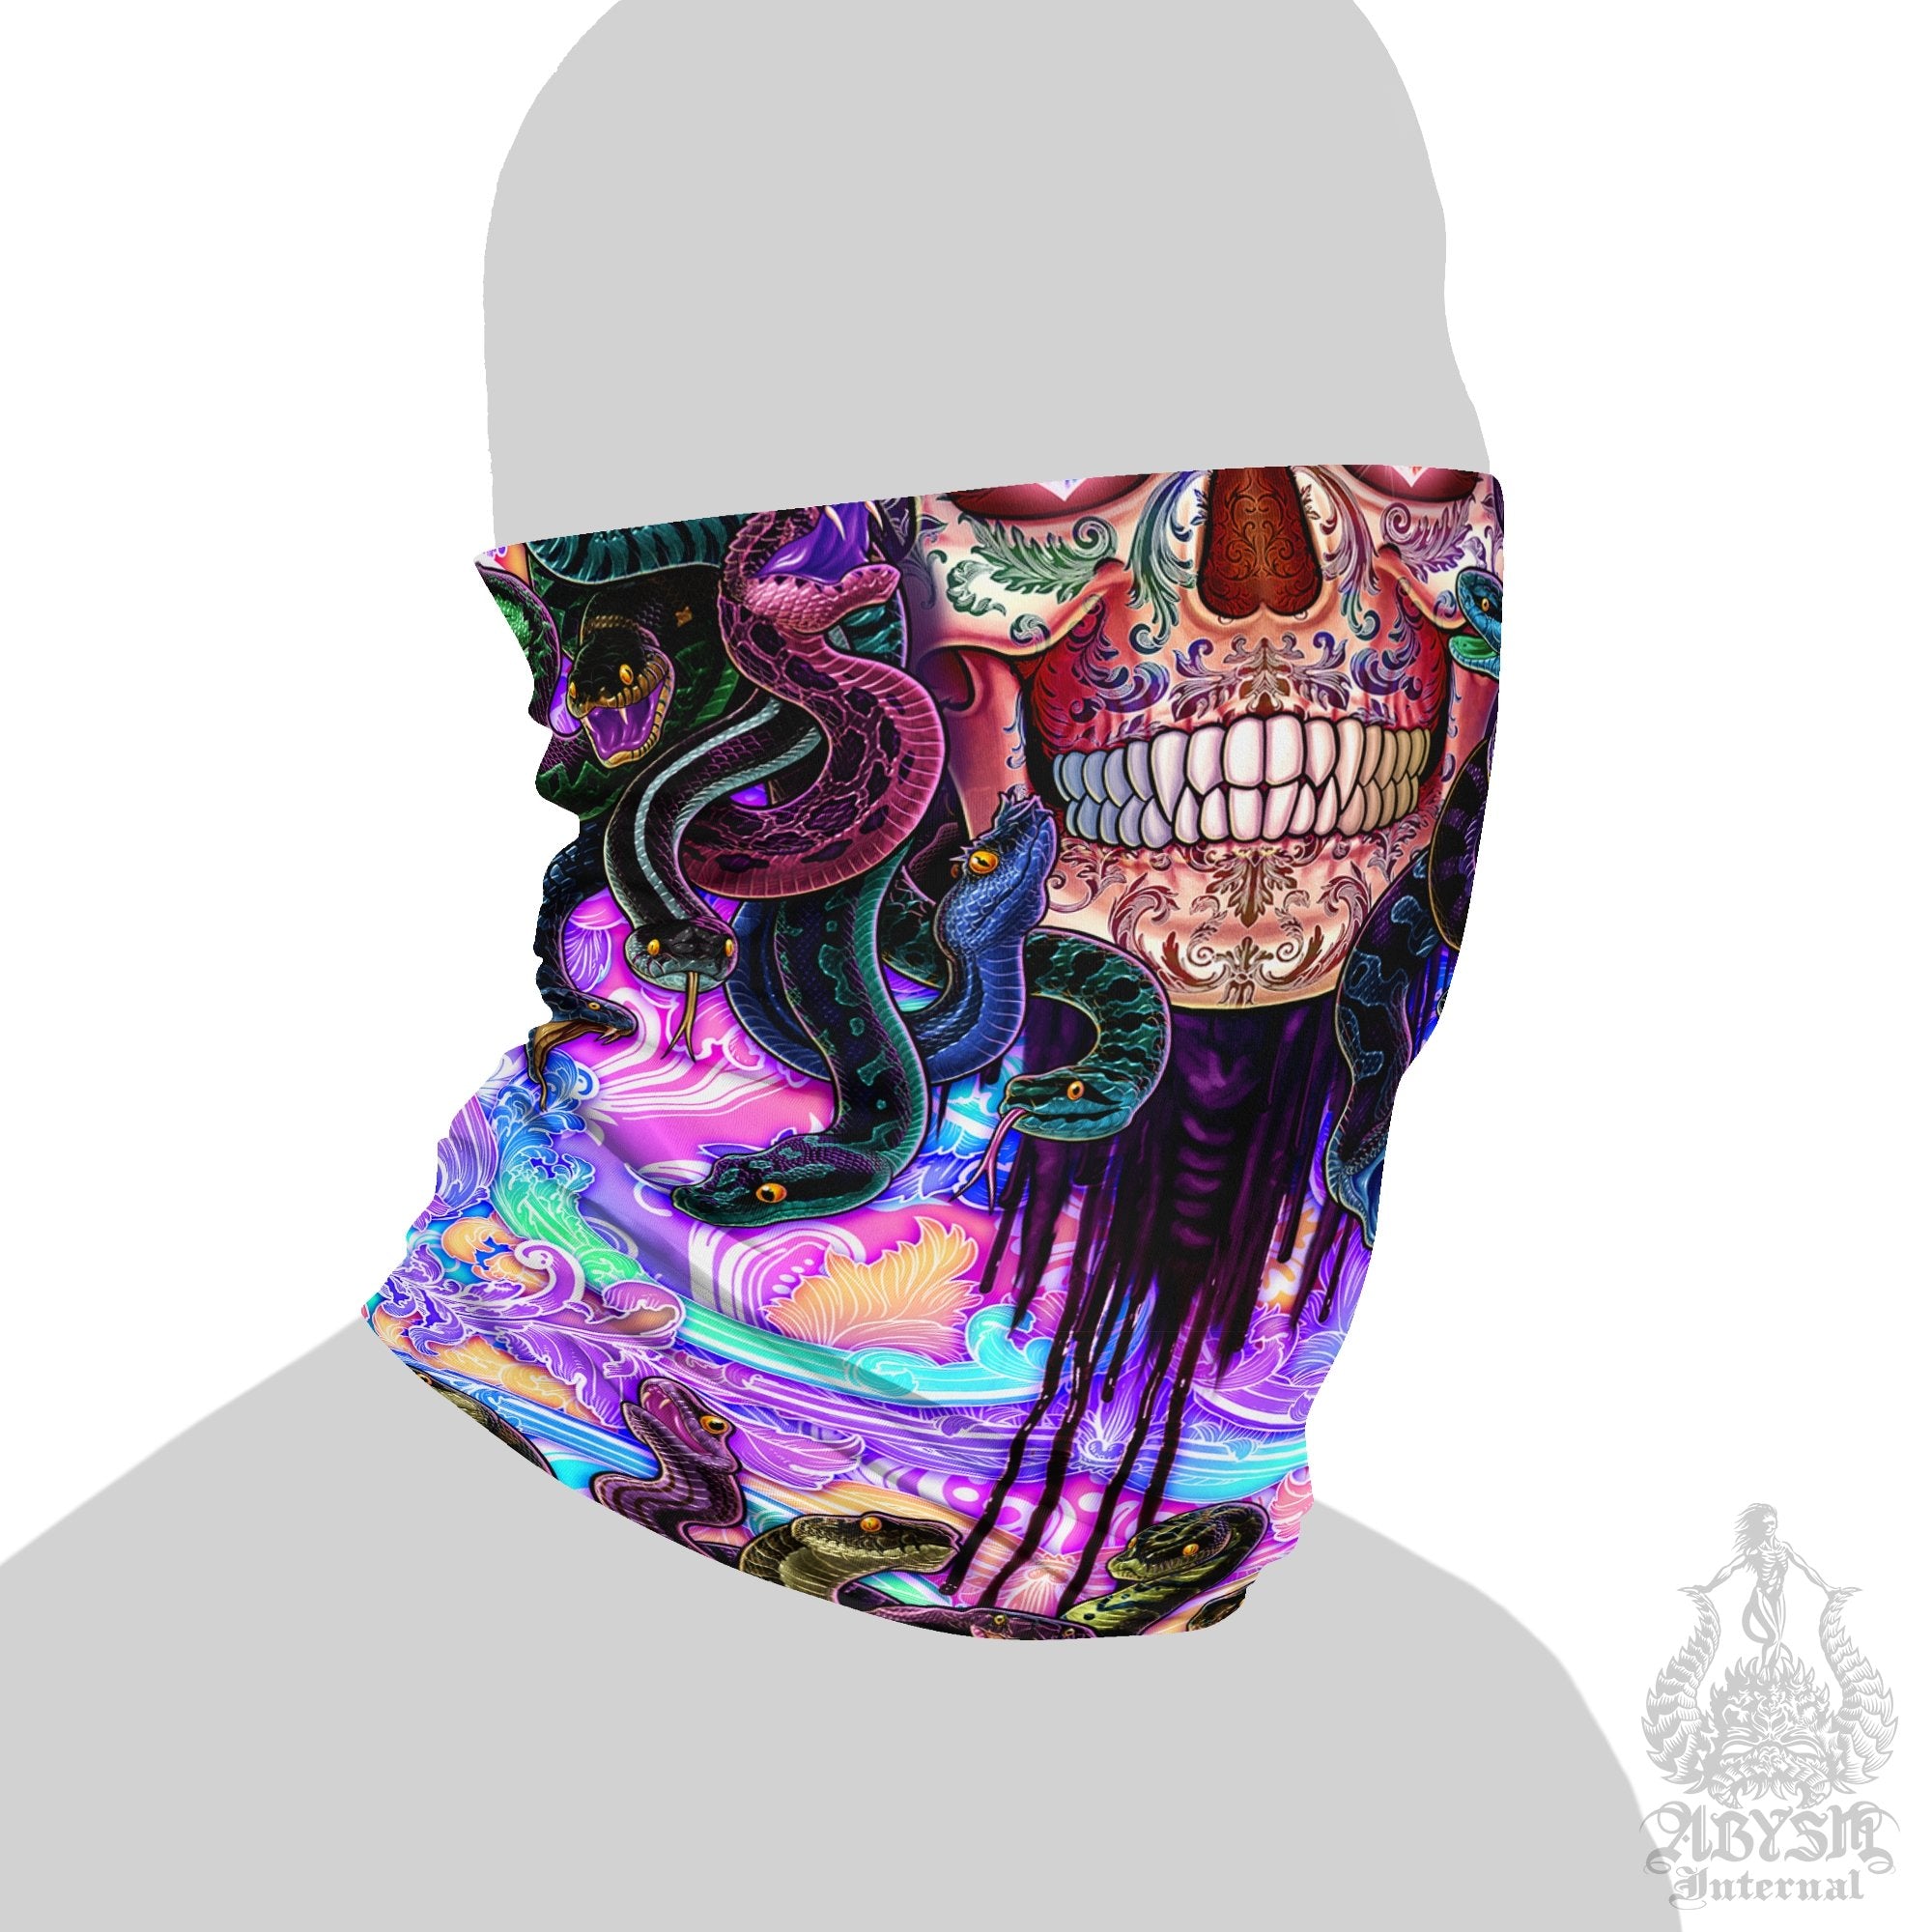 Psychedelic Neck Gaiter, Face Mask, Head Covering, Snakes, Medusa, Rave Outfit, Holographic Pastel Punk Black, Skull Art - 4 Face Options - Abysm Internal